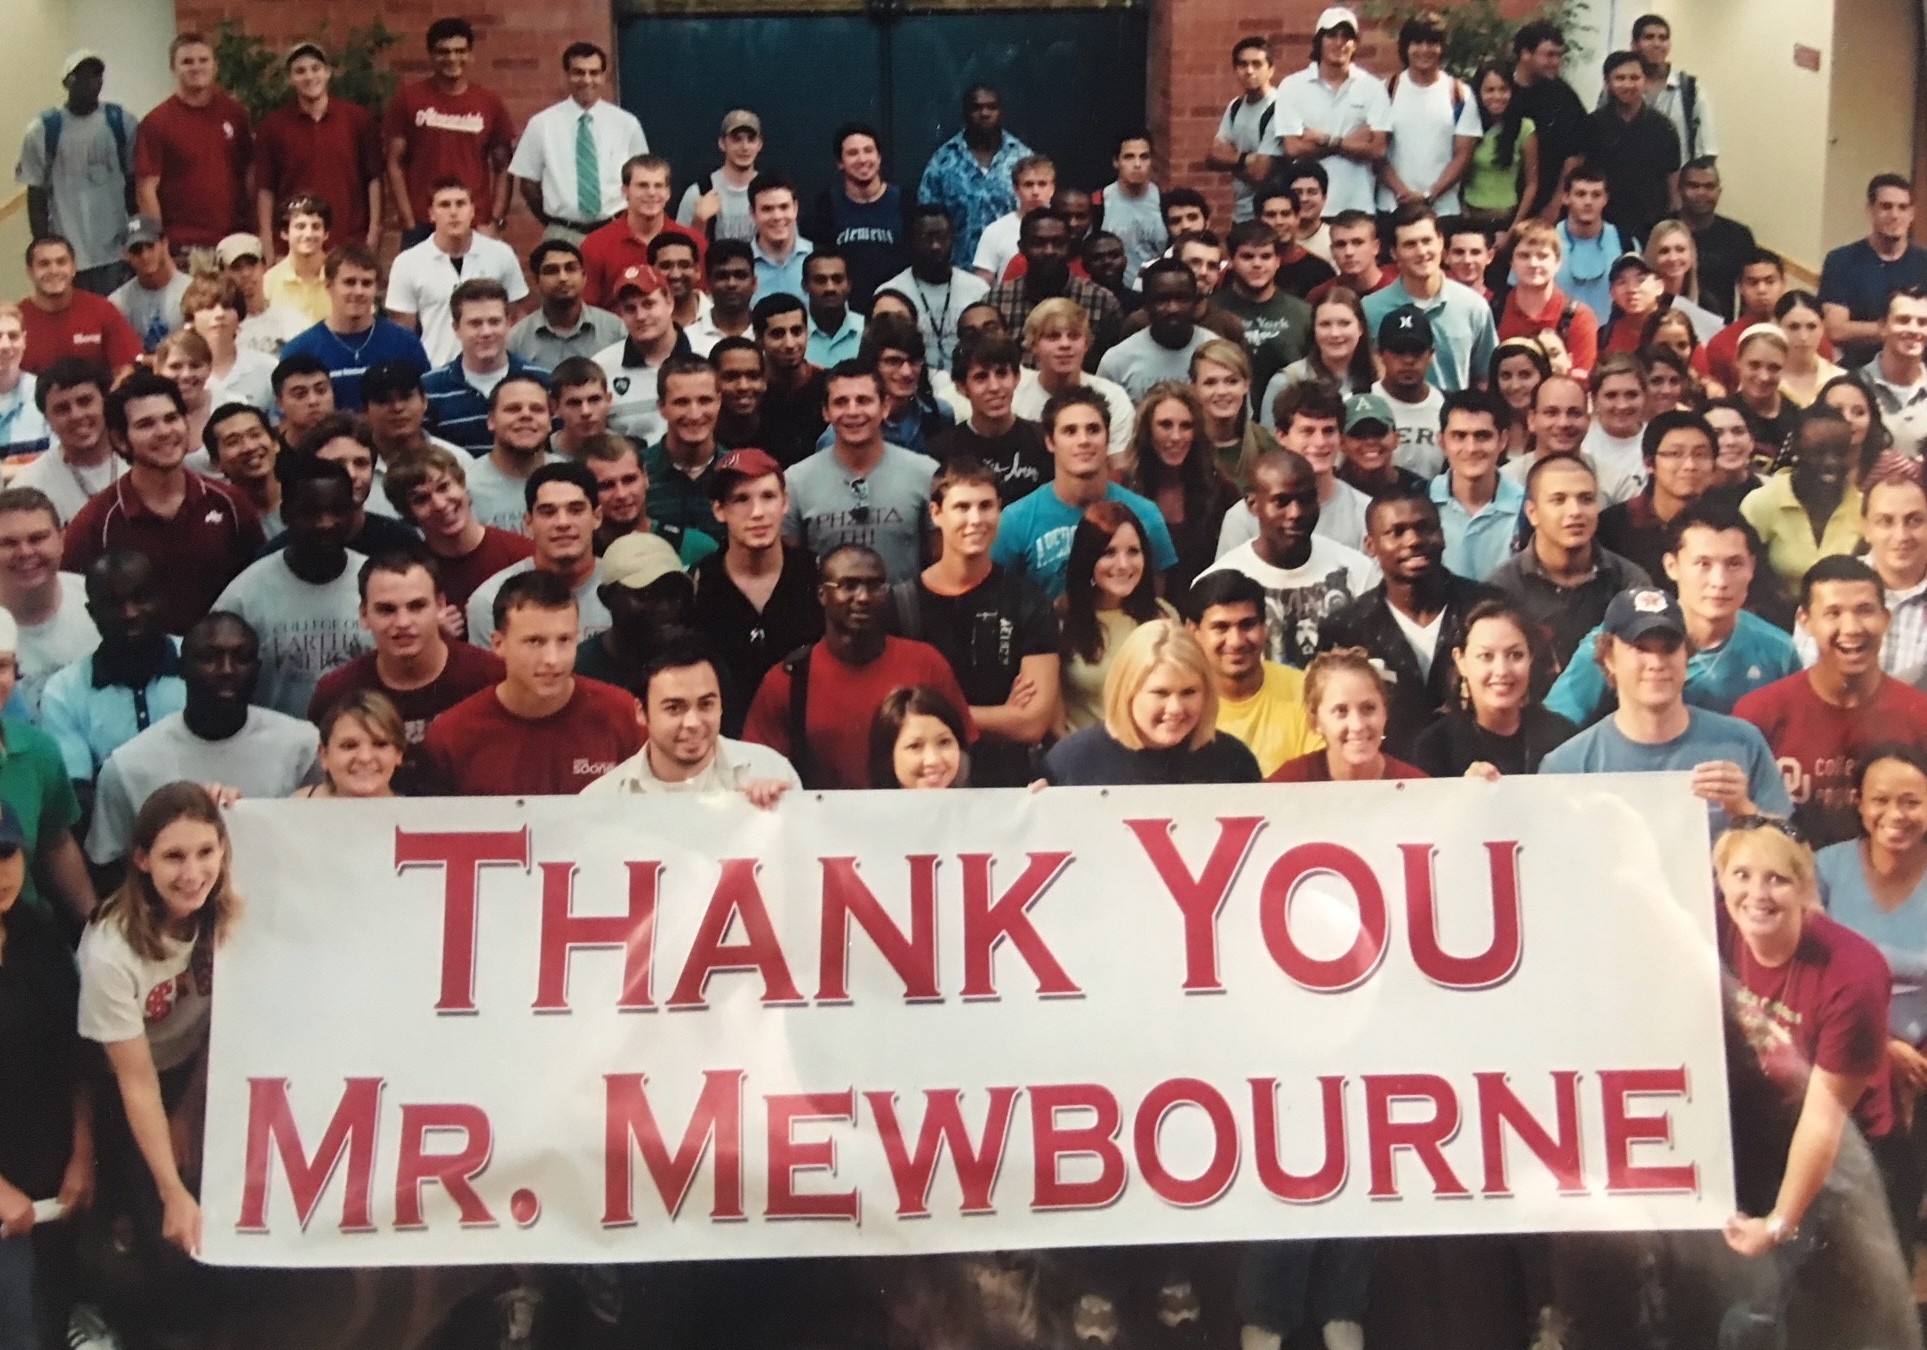 Society of Petroleum Engineers (SPE) students hold a banner thanking Mr. Mewbourne shortly after his naming gift for the Mewbourne School of Petroleum and Geological Engineering.